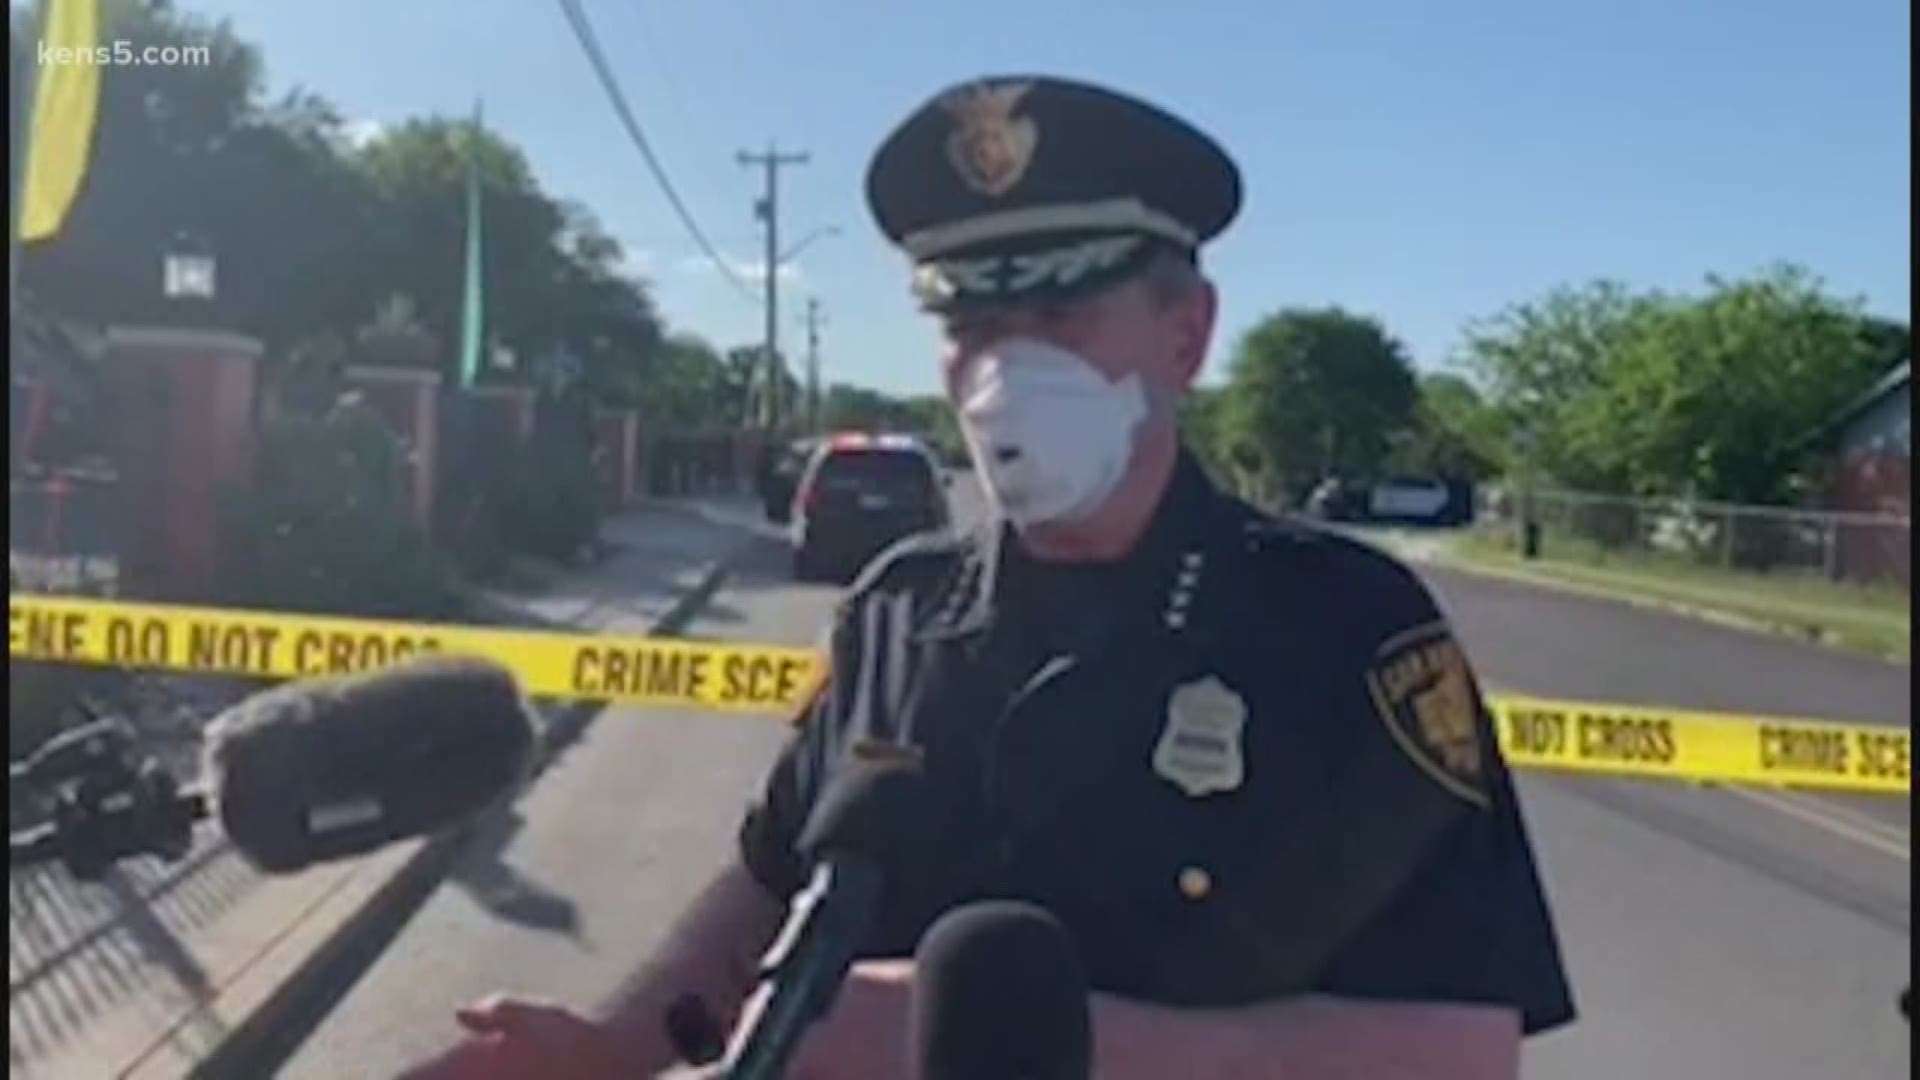 San Antonio's police chief said it was by a stroke of luck that one of his officers wasn't killed.